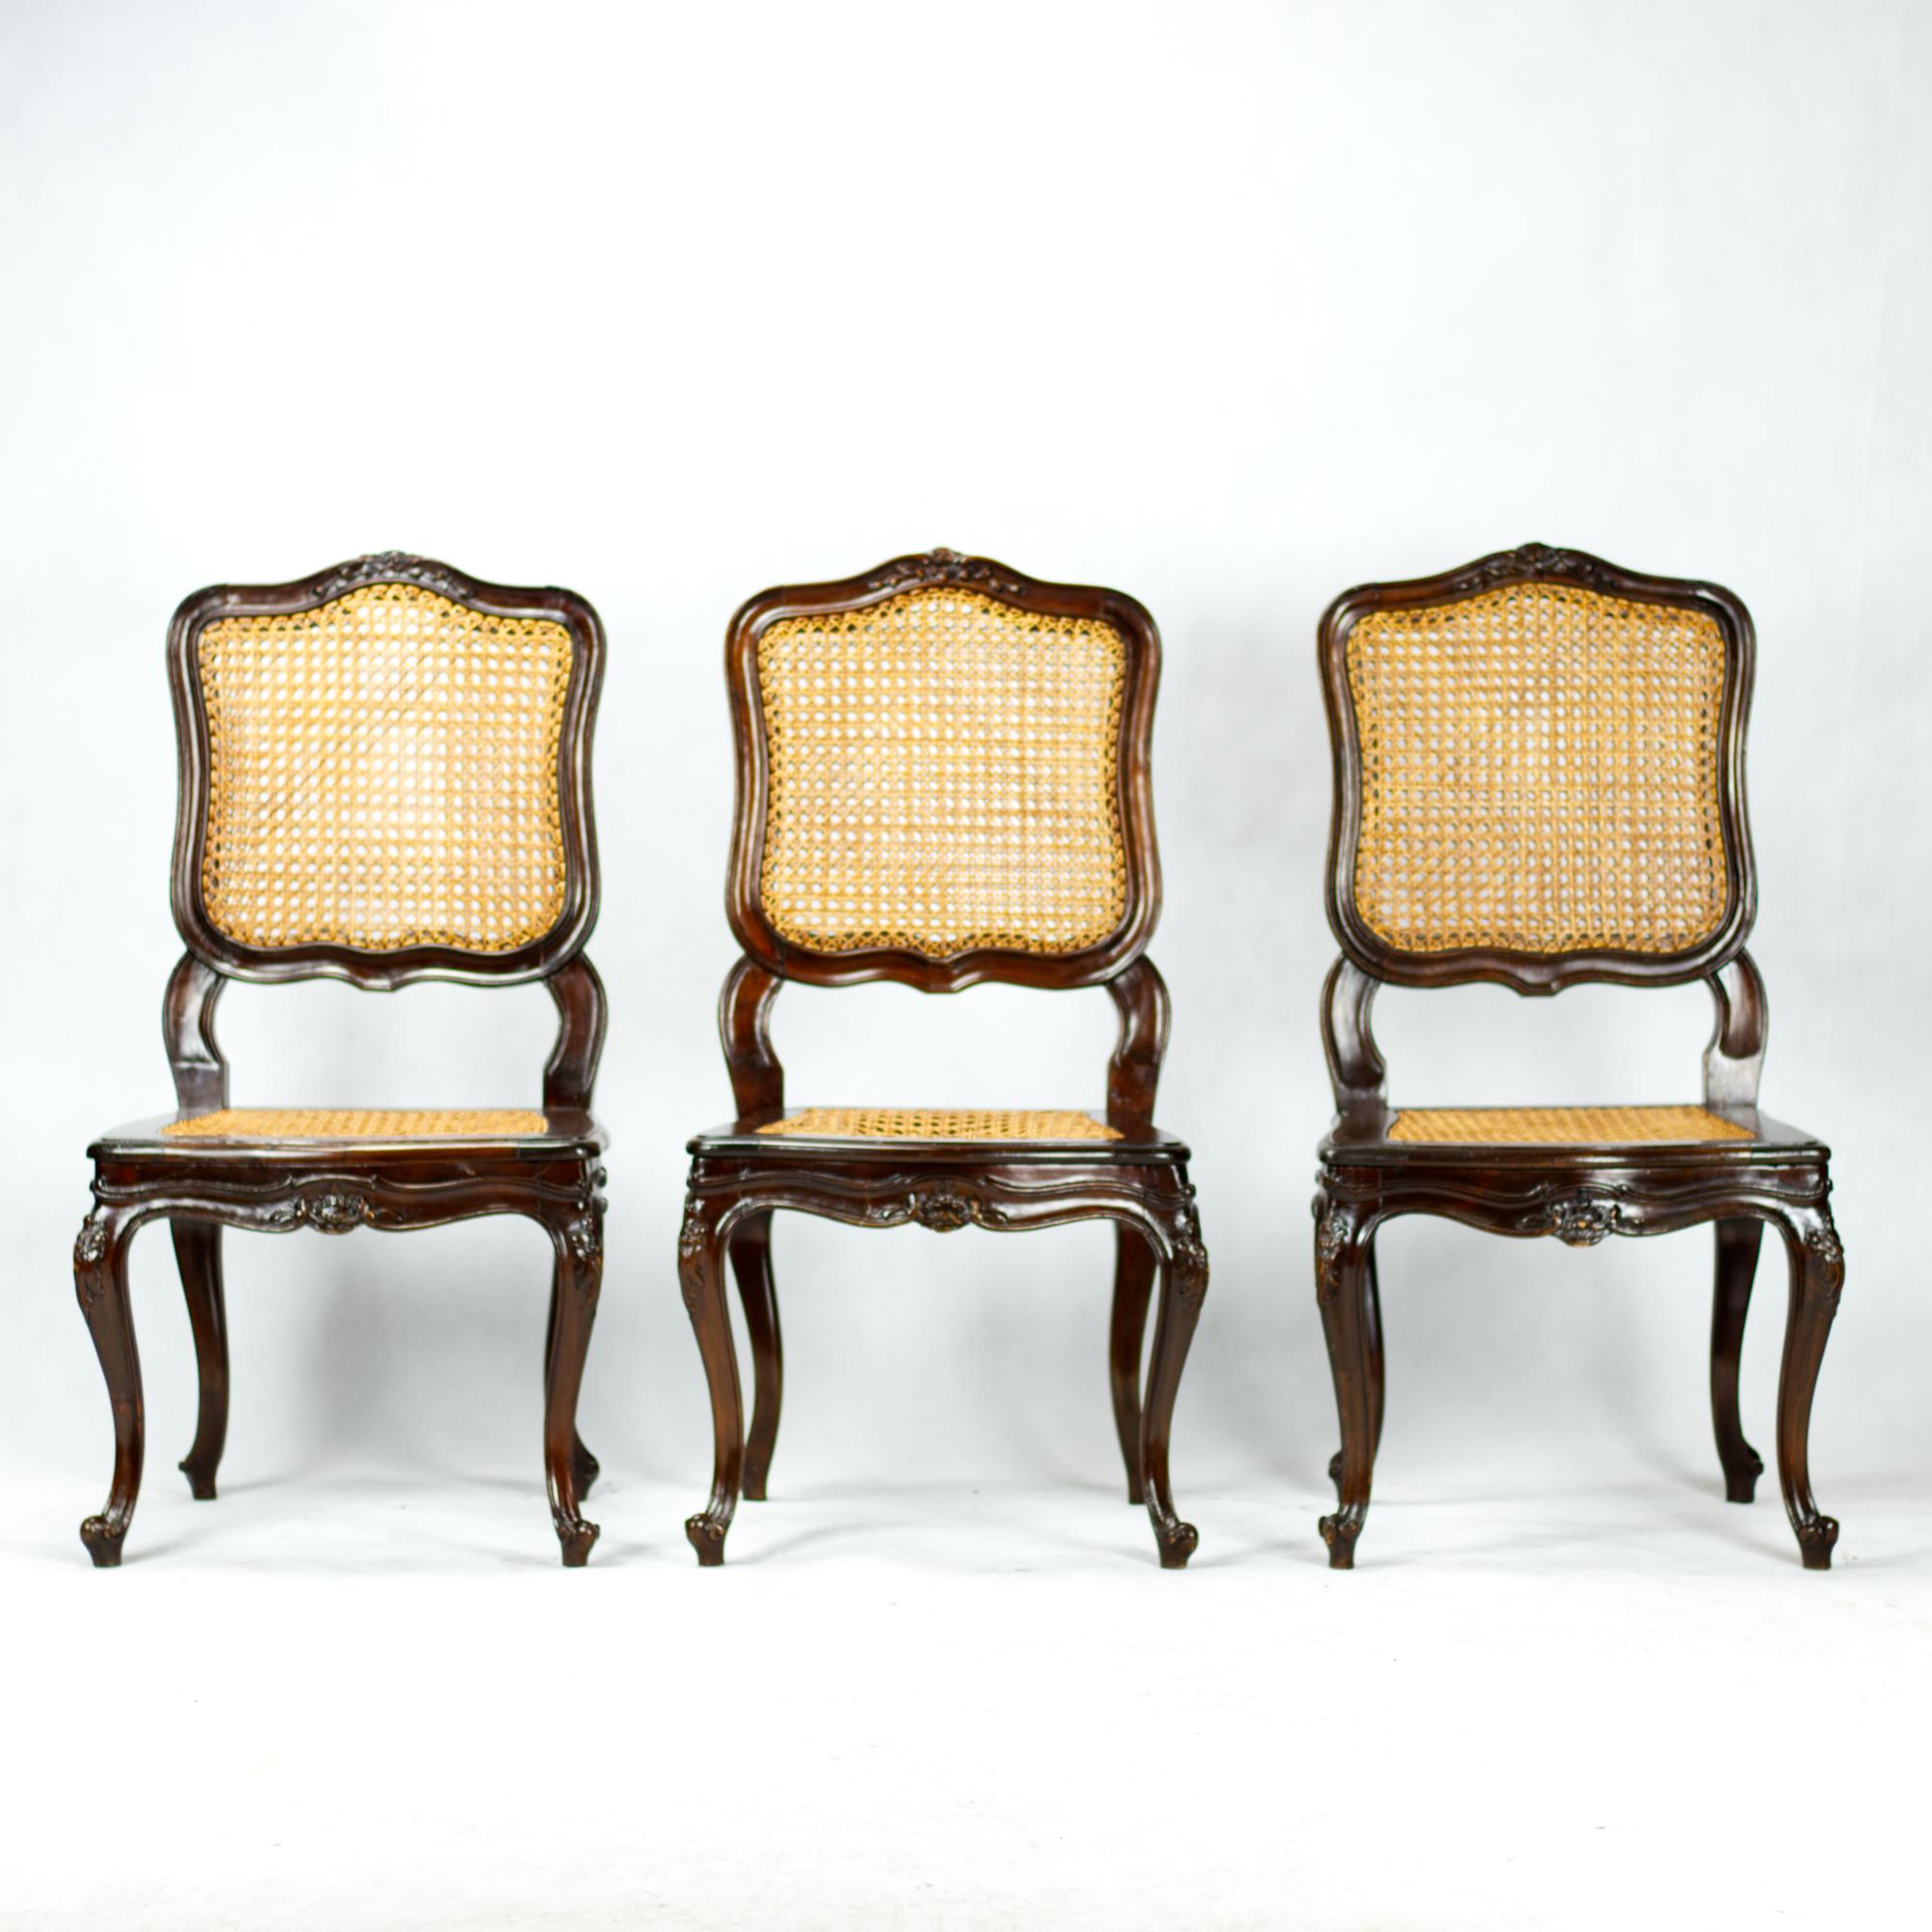 A set of six French hand carved dining chairs from the second half of the 19th century with cane seats and backrests.
Louis XV-style dining chairs in walnut style with well-articulated leaf carvings on the back and apron, with woven seat and back